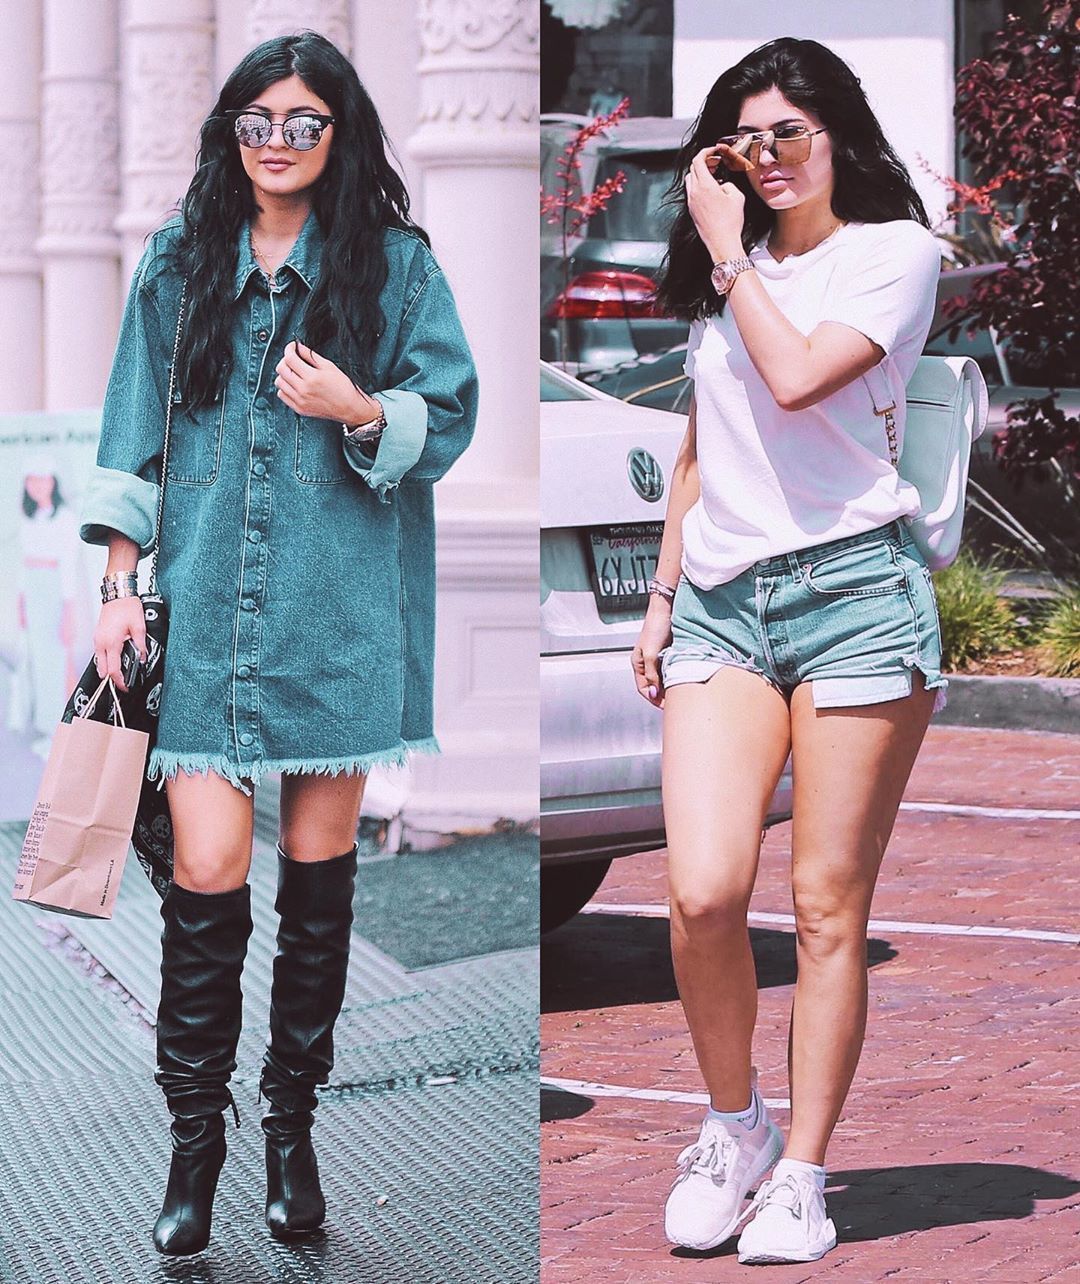 Kylie Jenner Style Comparison: Open vs Closed